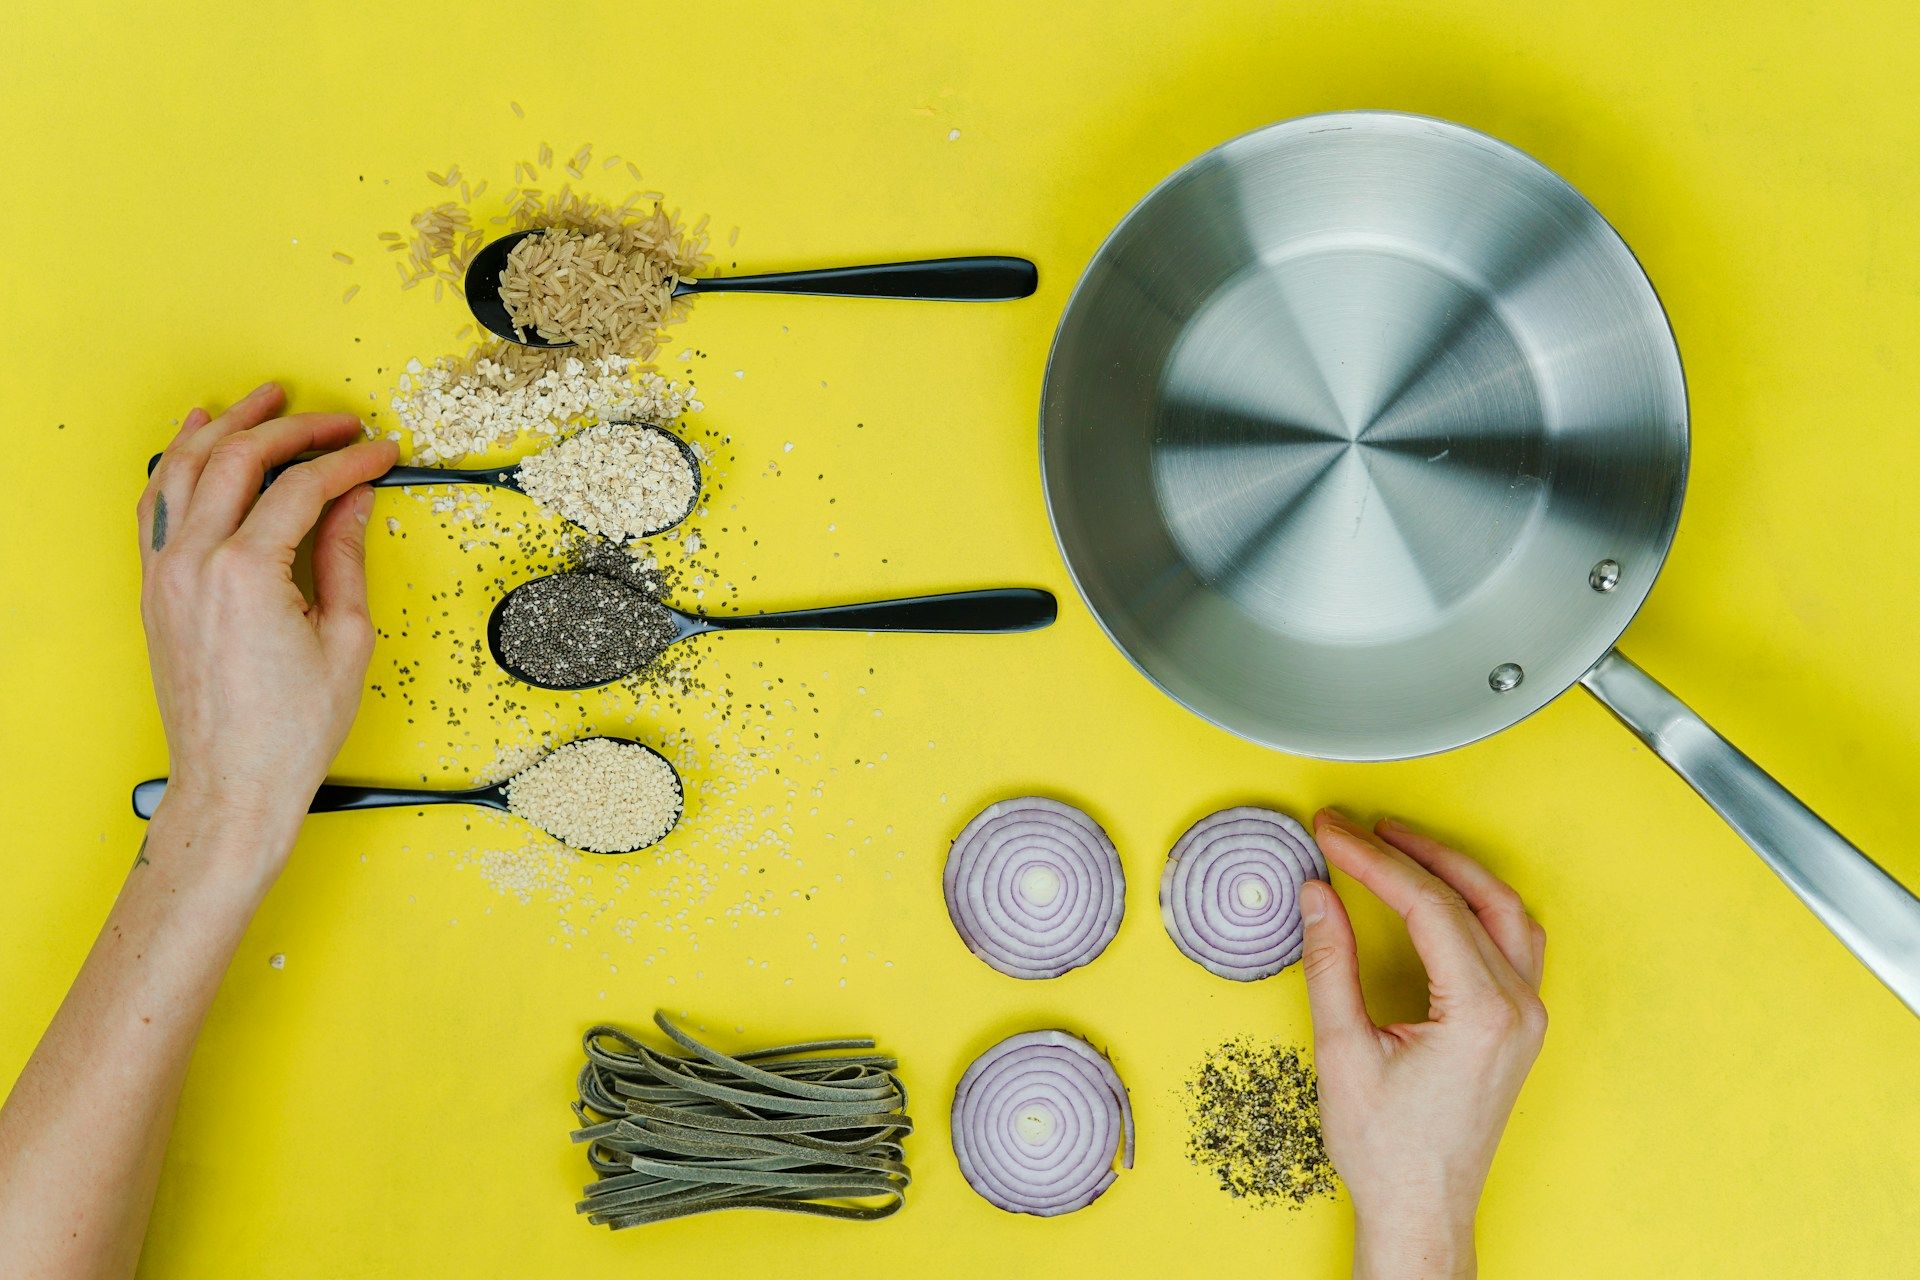 Hands preparing healthy ingredients: various grains on spoons, red onion slices, and a cooking pot on a bright yellow background